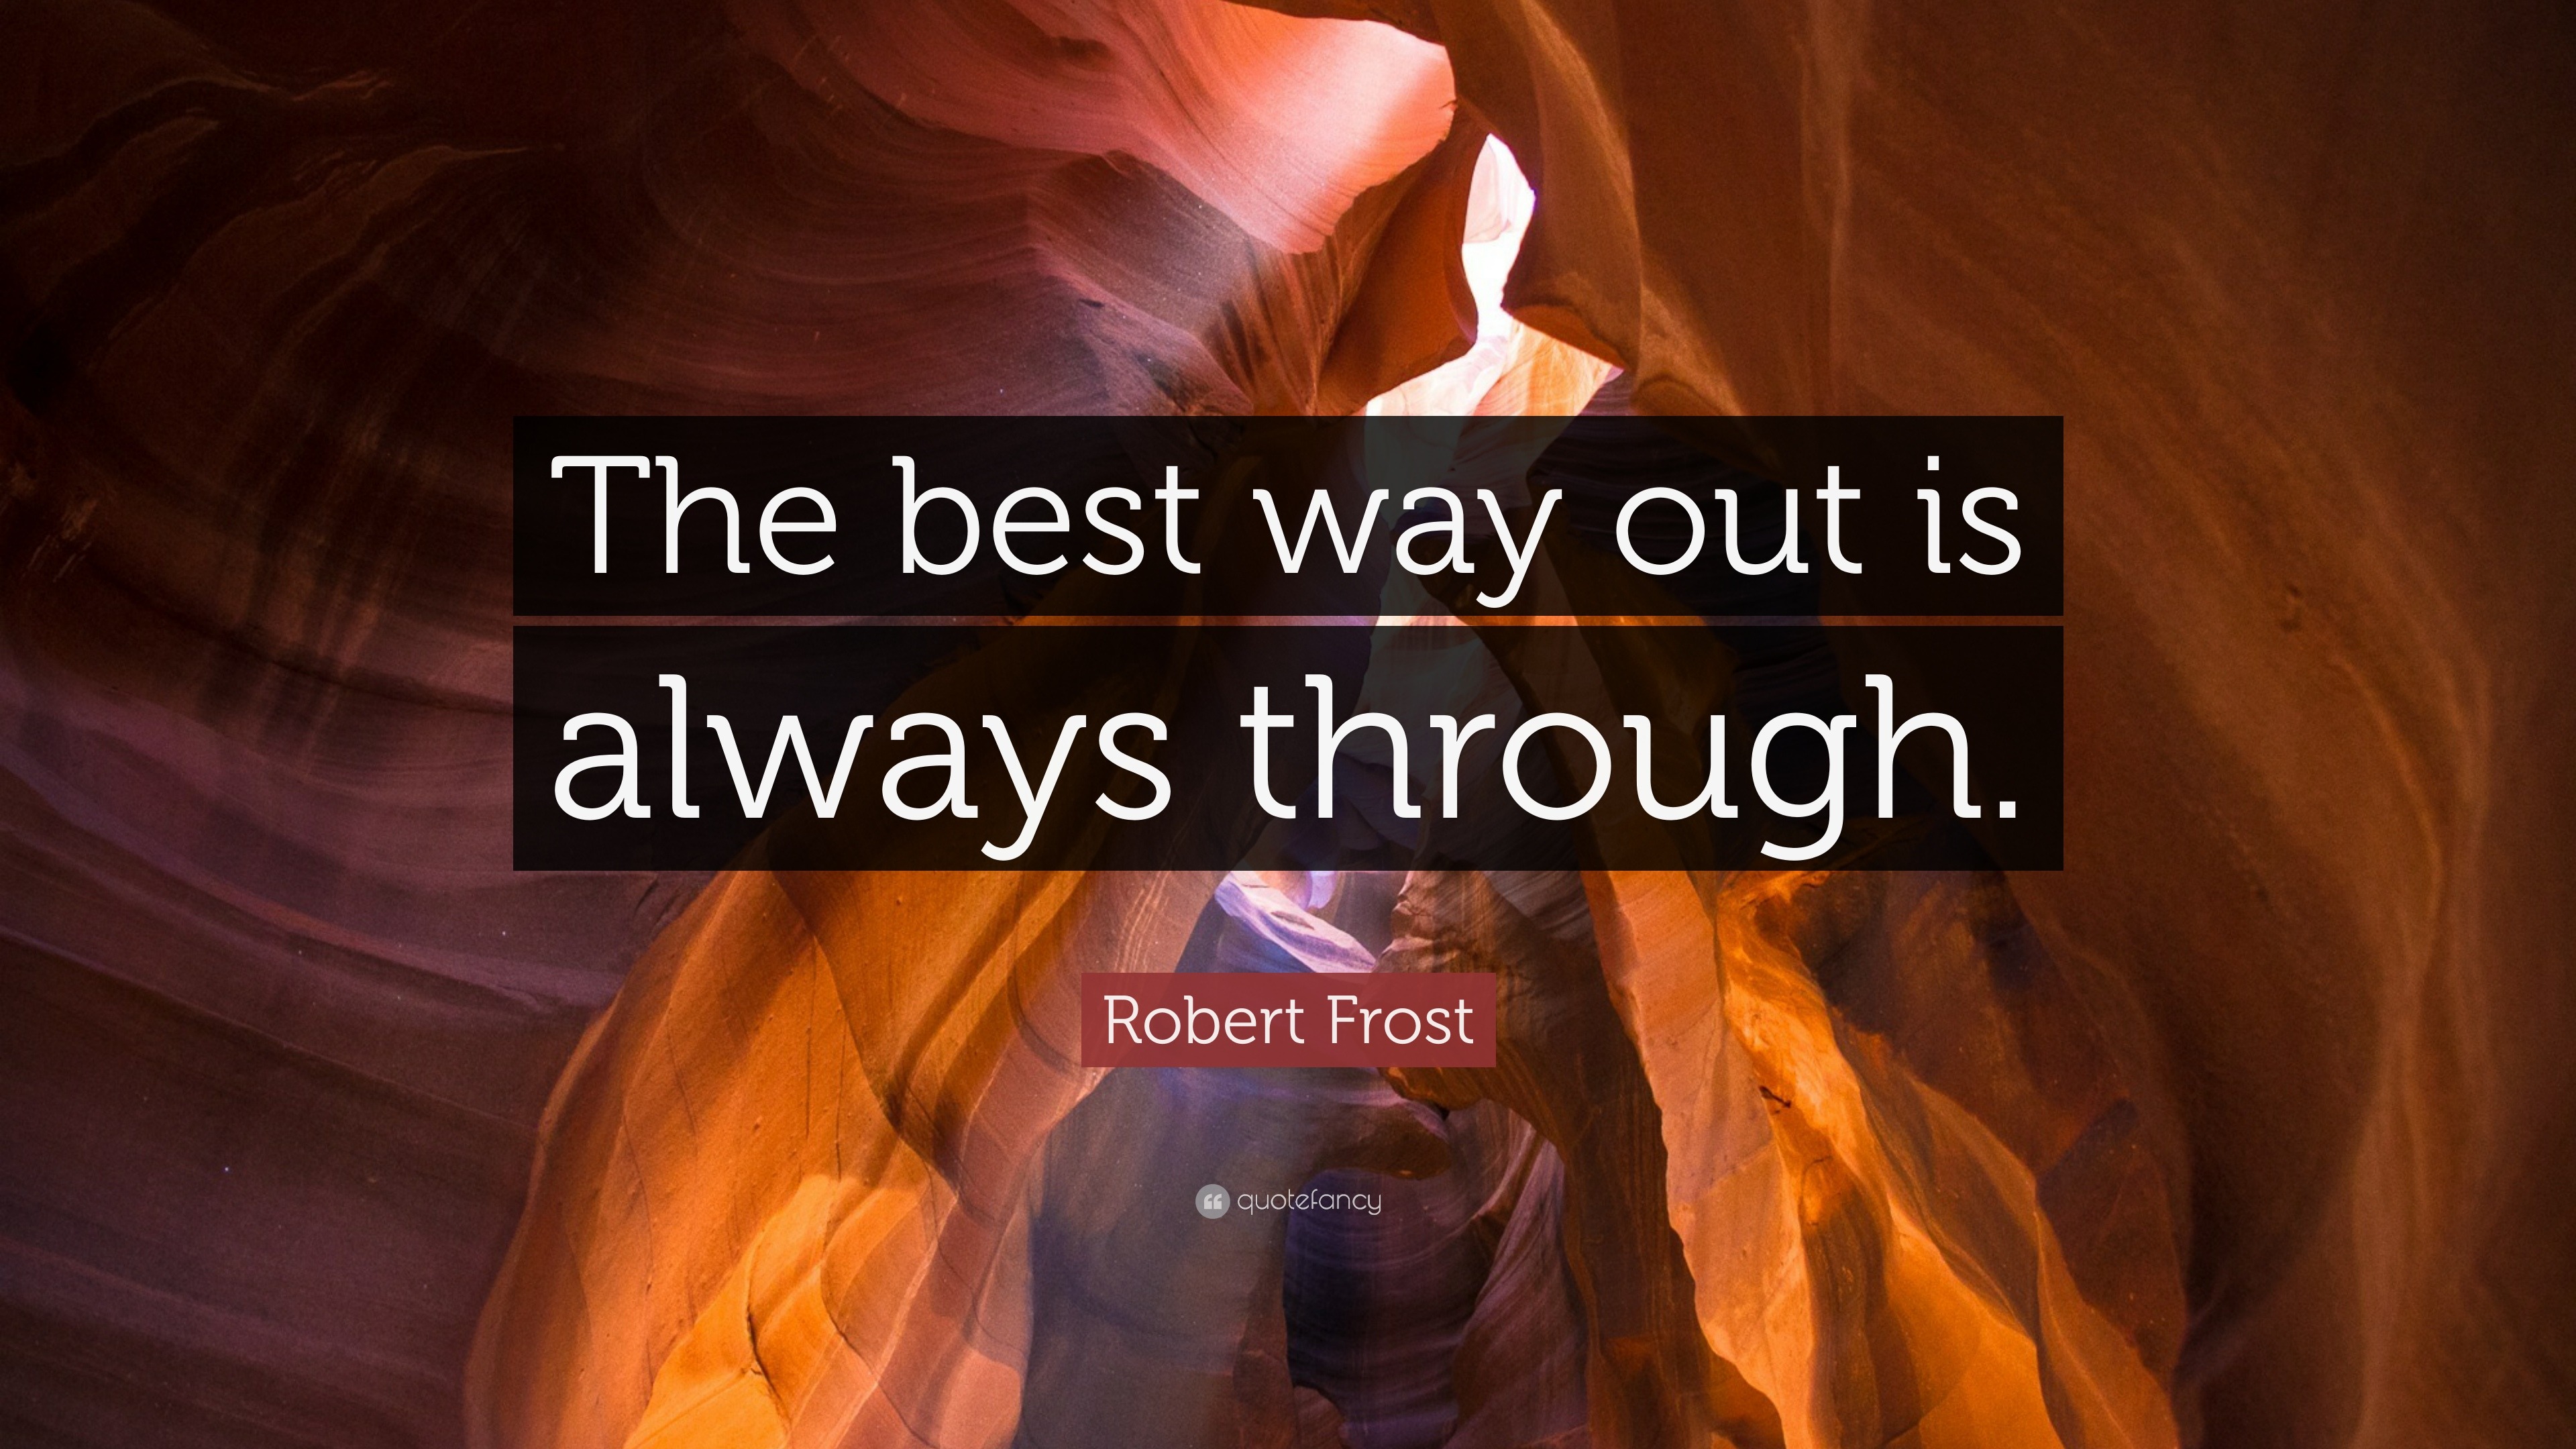 Robert Frost Quote: “The best way out is always through.”